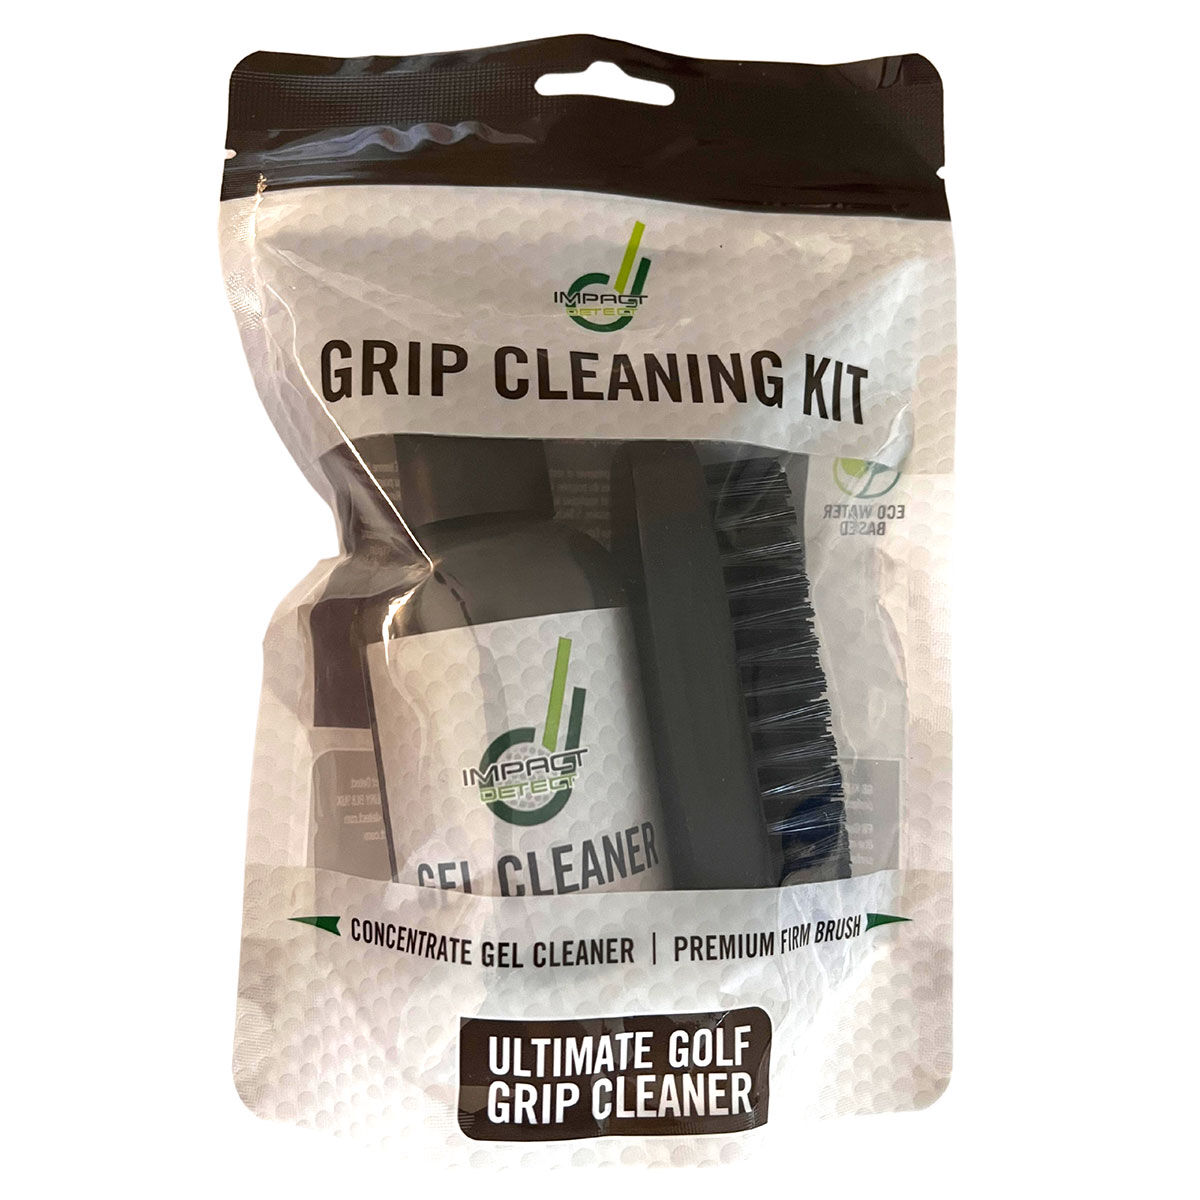 Impact Detect Golf Grip Cleaner Kit | American Golf, One Size von Impact Detect